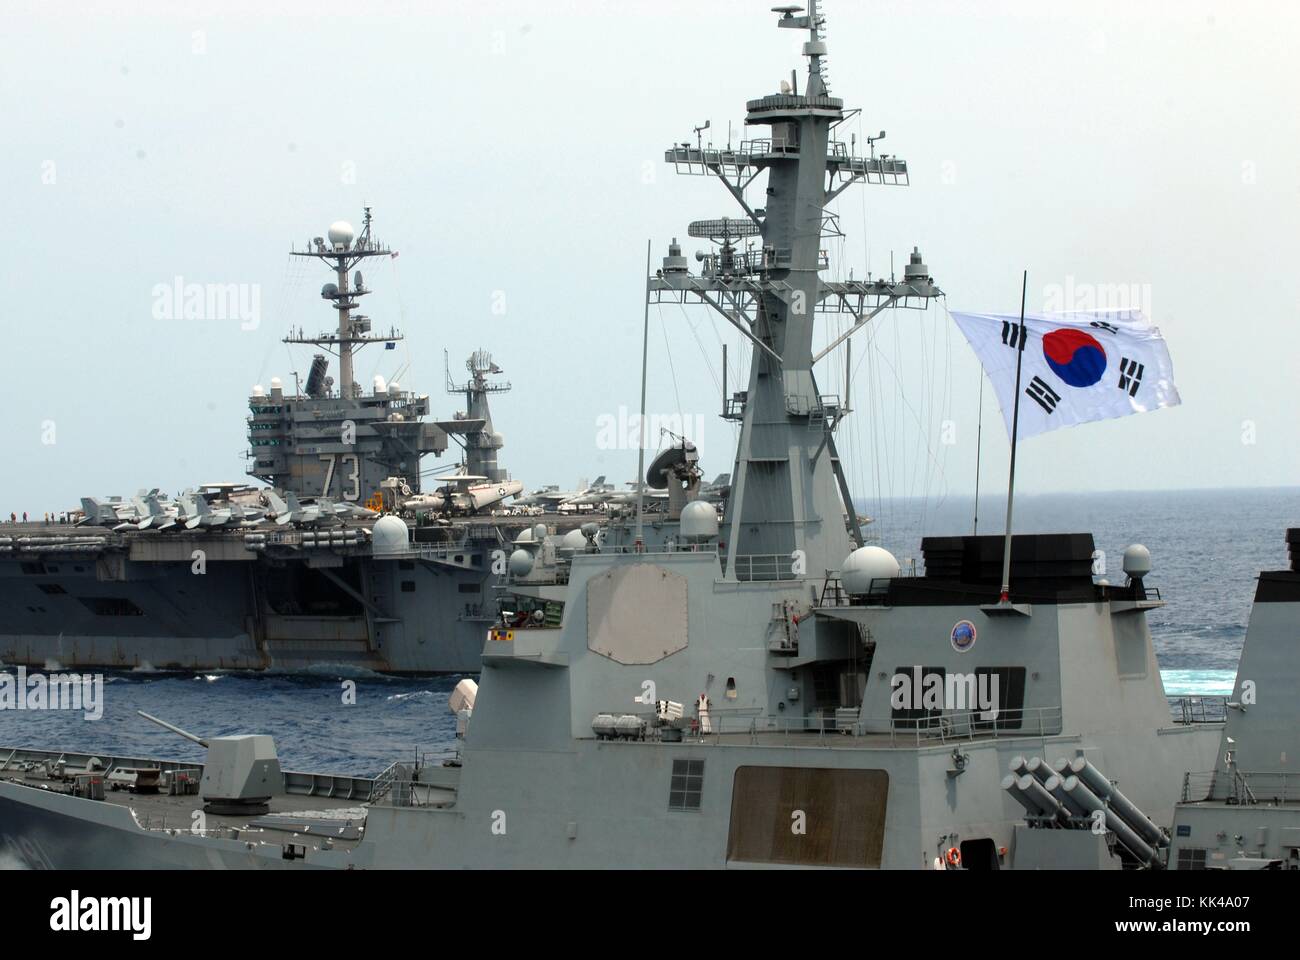 The aircraft carrier USS George Washington CVN 73 and the Republic of Korea navy destroyer ROKS Sejong the Great DDG 991 participate in a trilateral event, East China Sea, 2012. Image courtesy Mass Communication Specialist 1st Class Jennifer A. Villalovos/US Navy. Stock Photo